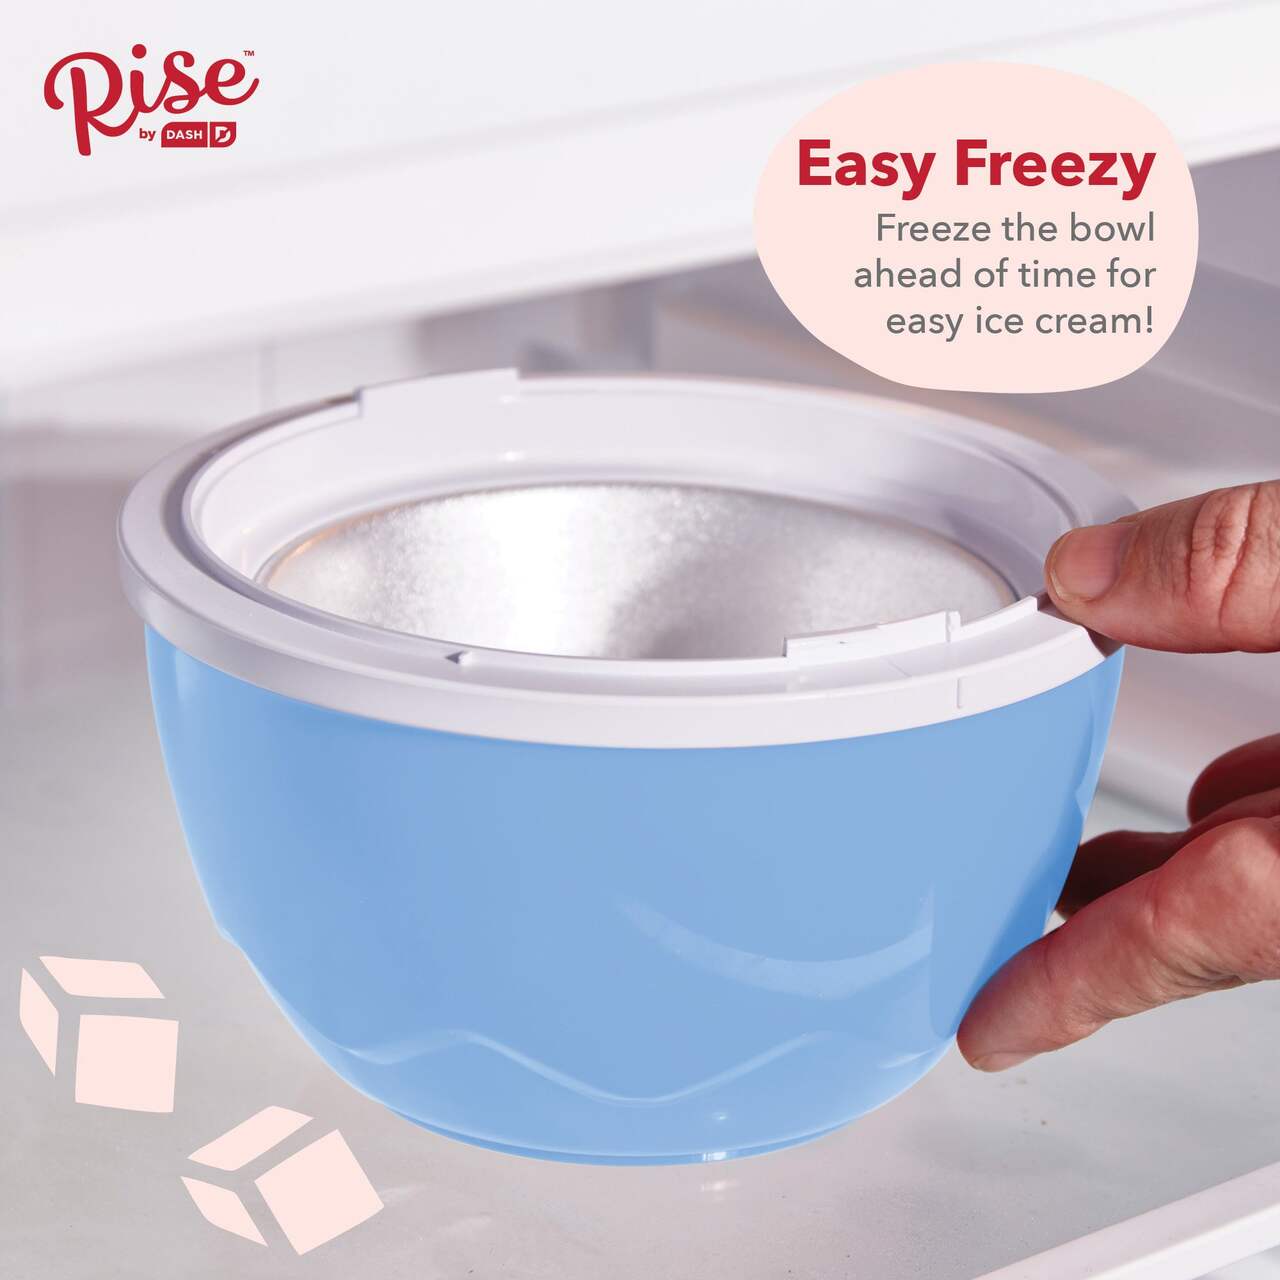 https://media-www.canadiantire.ca/product/living/kitchen/kitchen-appliances/0437062/rise-by-dash-my-pint-ice-cream-maker-af13c105-1d56-4540-b0b0-76f55c86e518-jpgrendition.jpg?imdensity=1&imwidth=1244&impolicy=mZoom